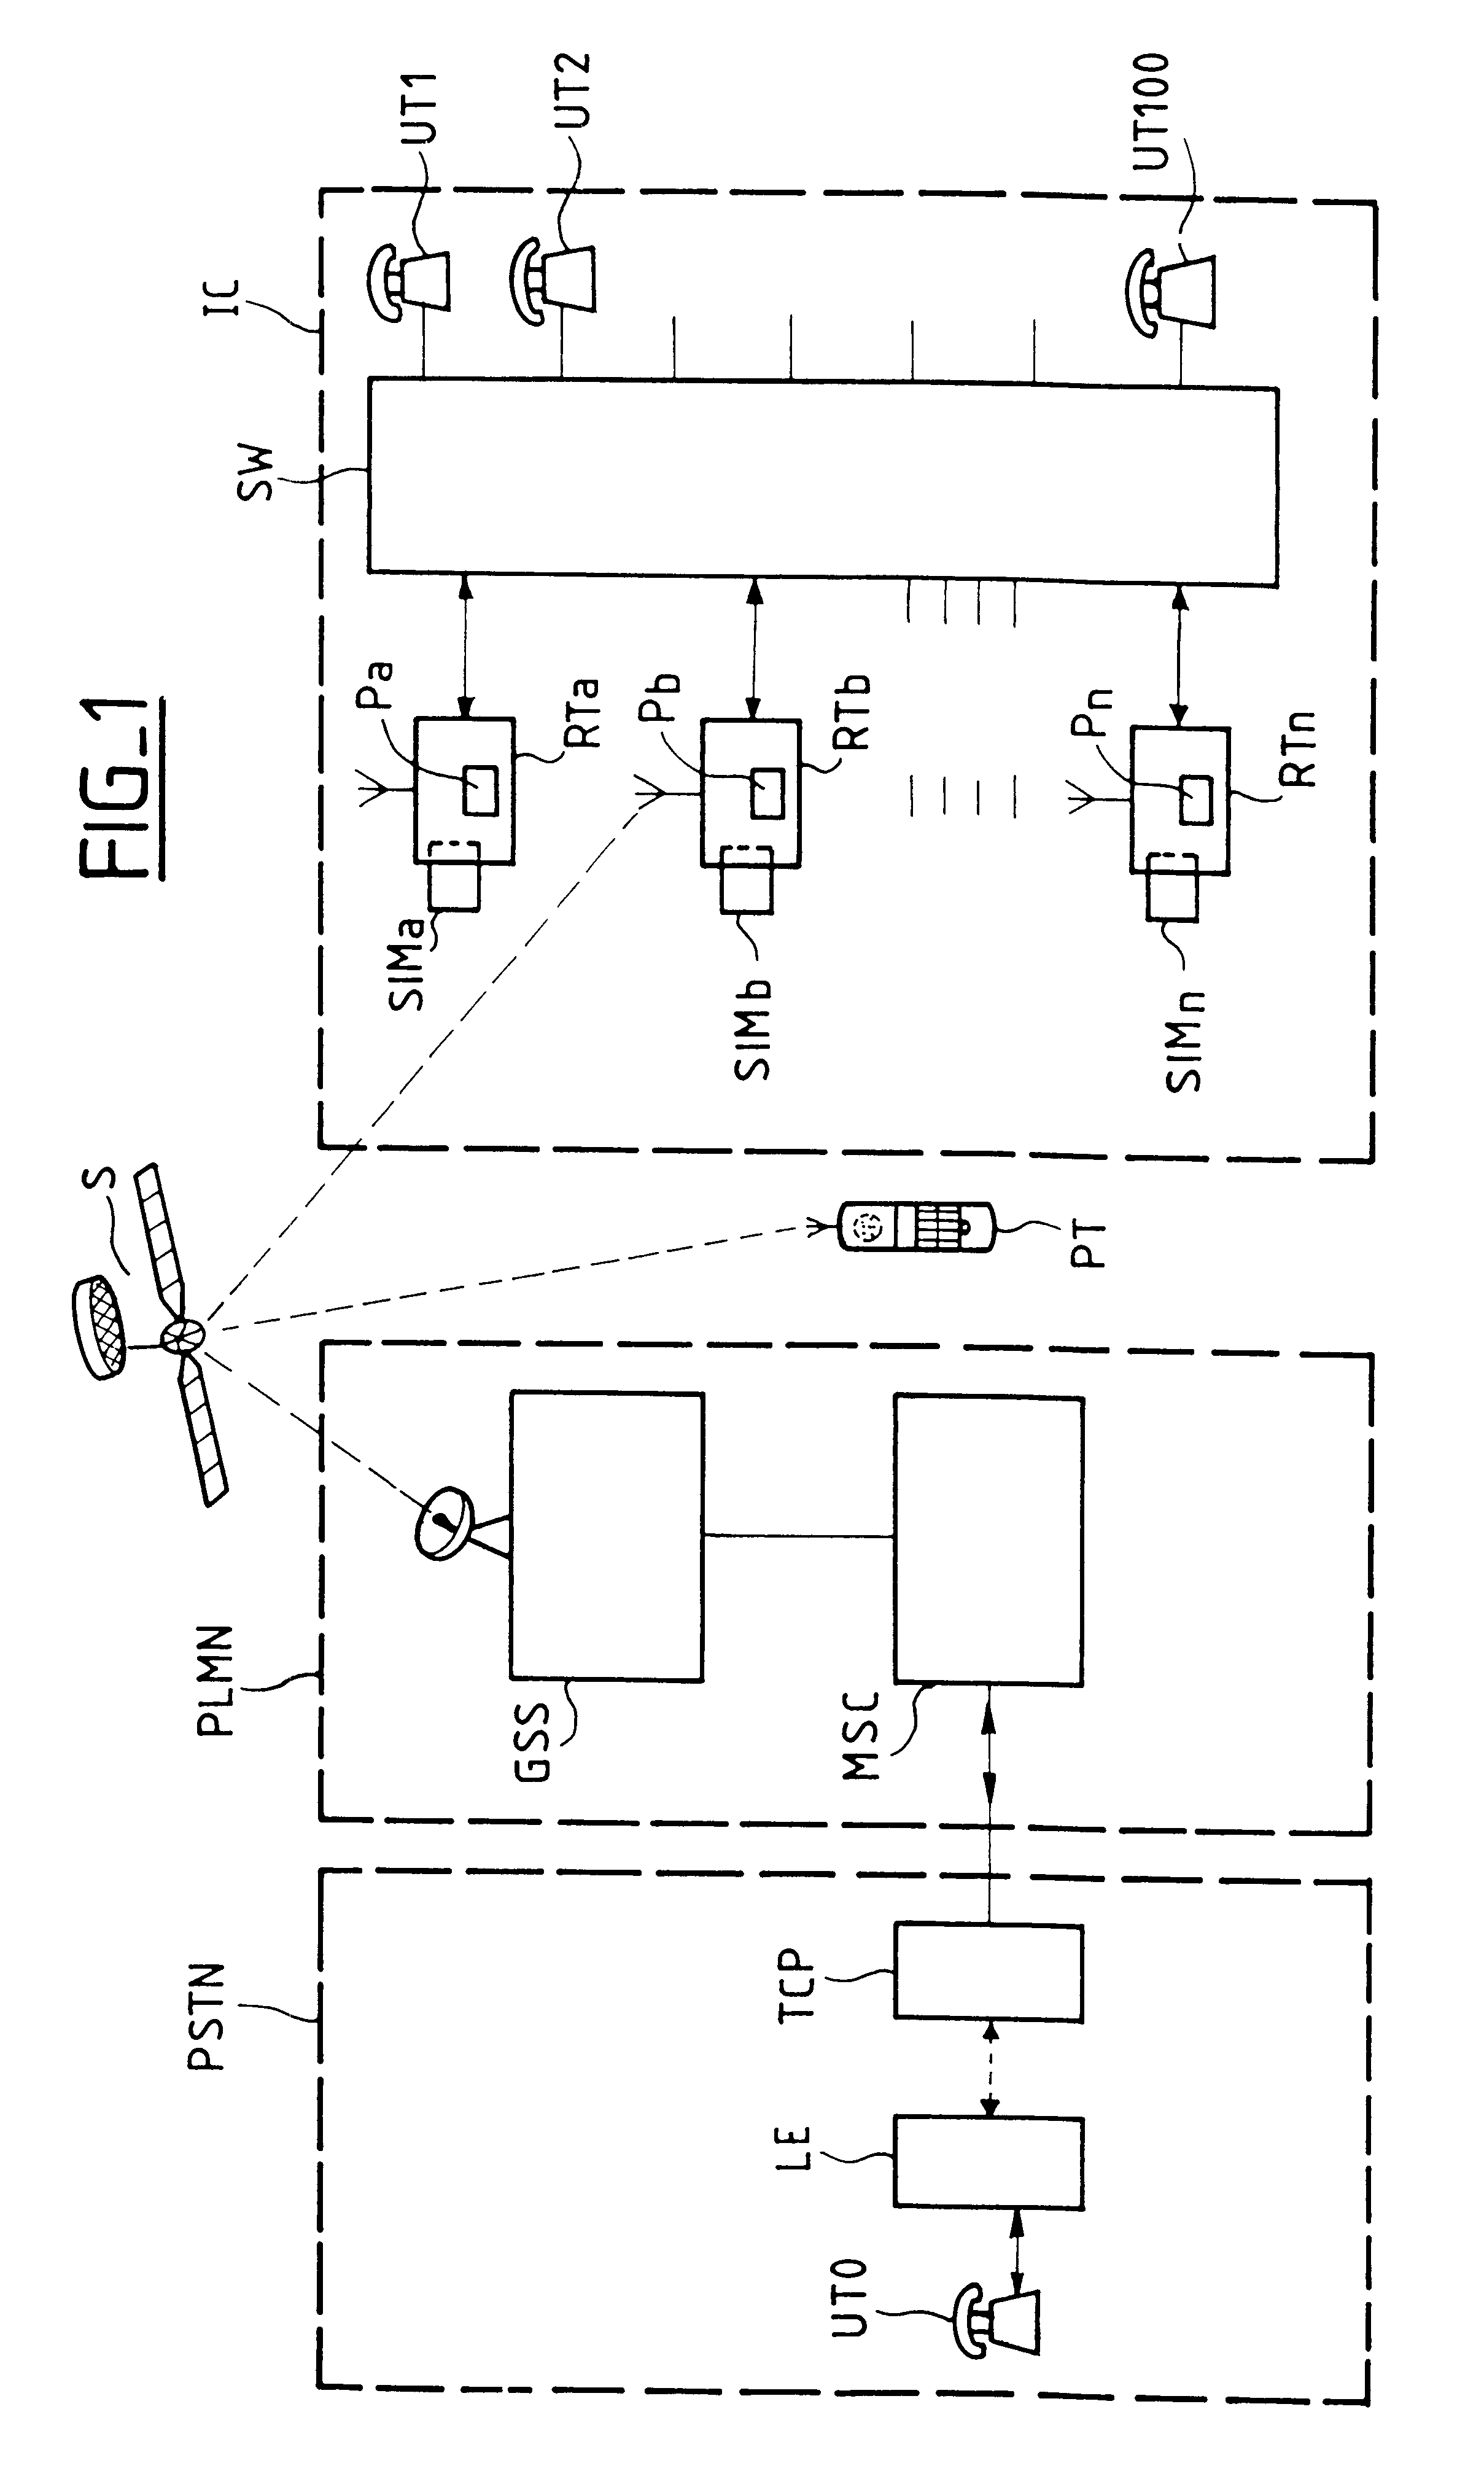 Transfer control point, mobile telephone fixed terminal and switch capable of being used in a device for connecting a telephone switch located in an isolated community to a fixed telephone network